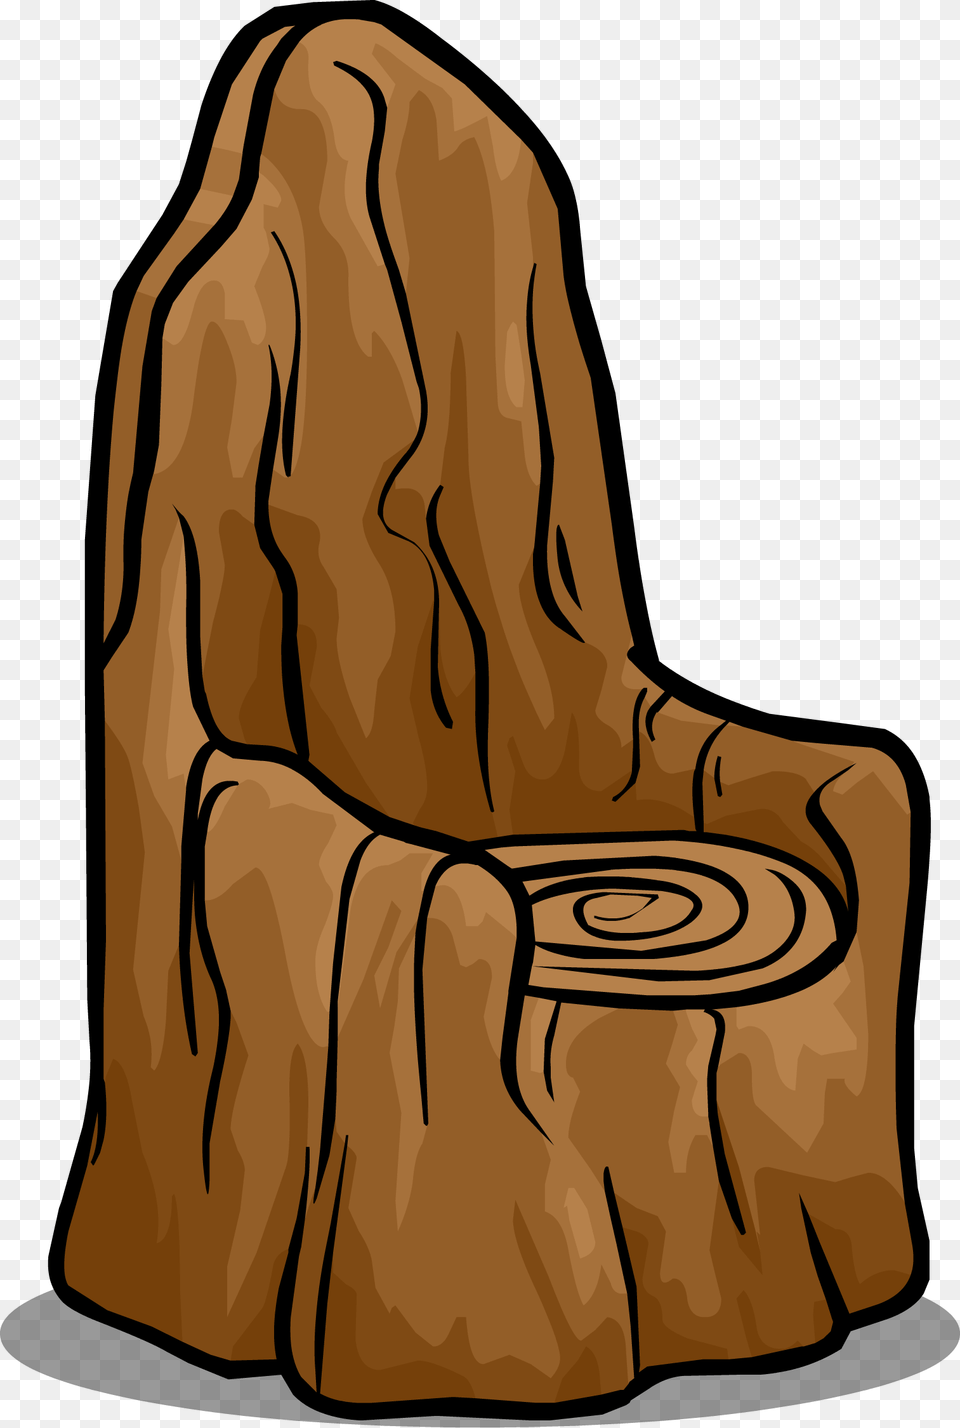 Tree Stump Chair Sprite 002 Chair, Plant, Tree Stump, Adult, Female Free Png Download